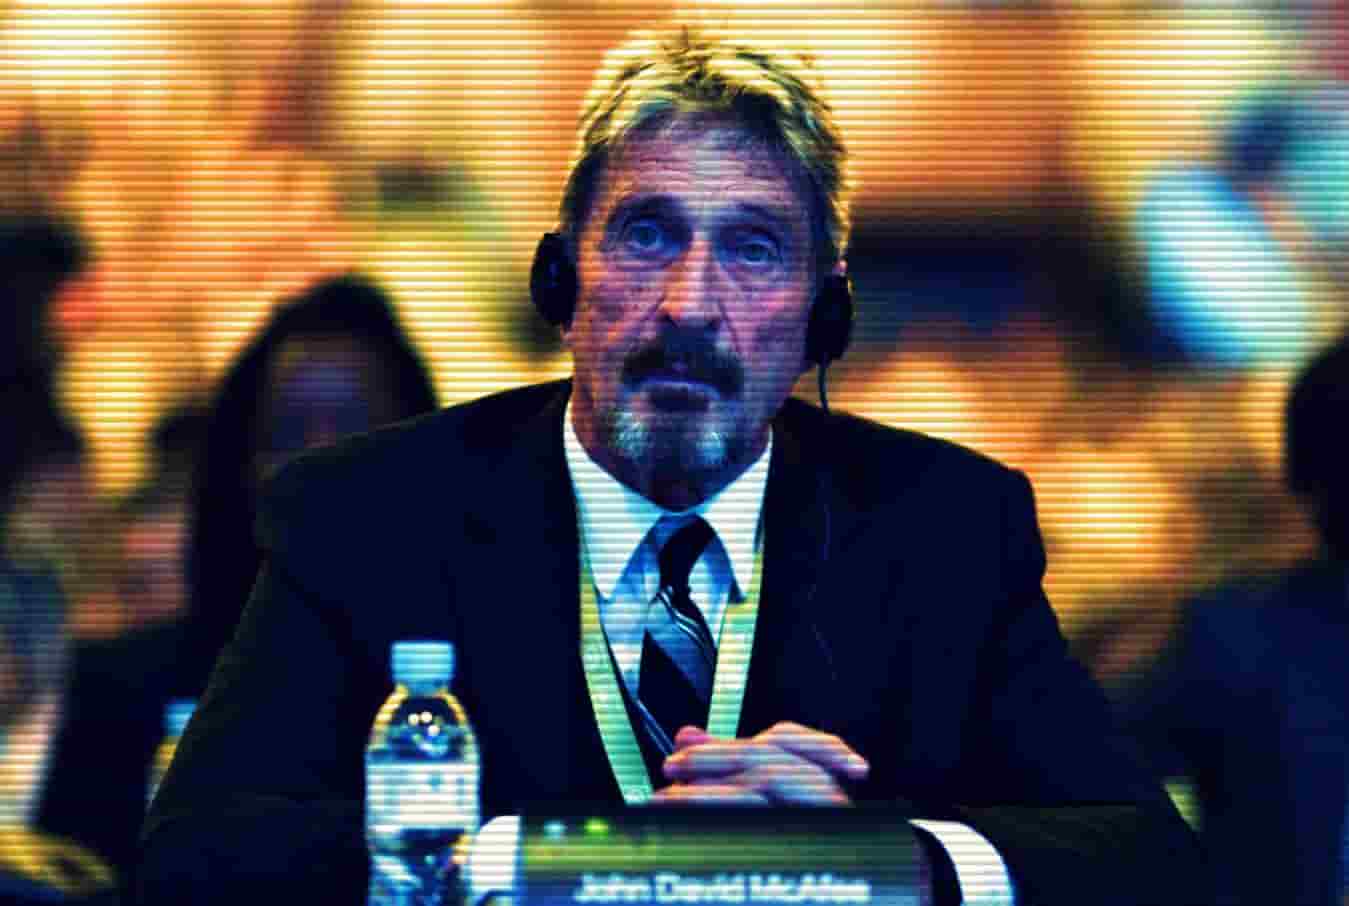 Reports suggest John McAfee has died in Spanish prison